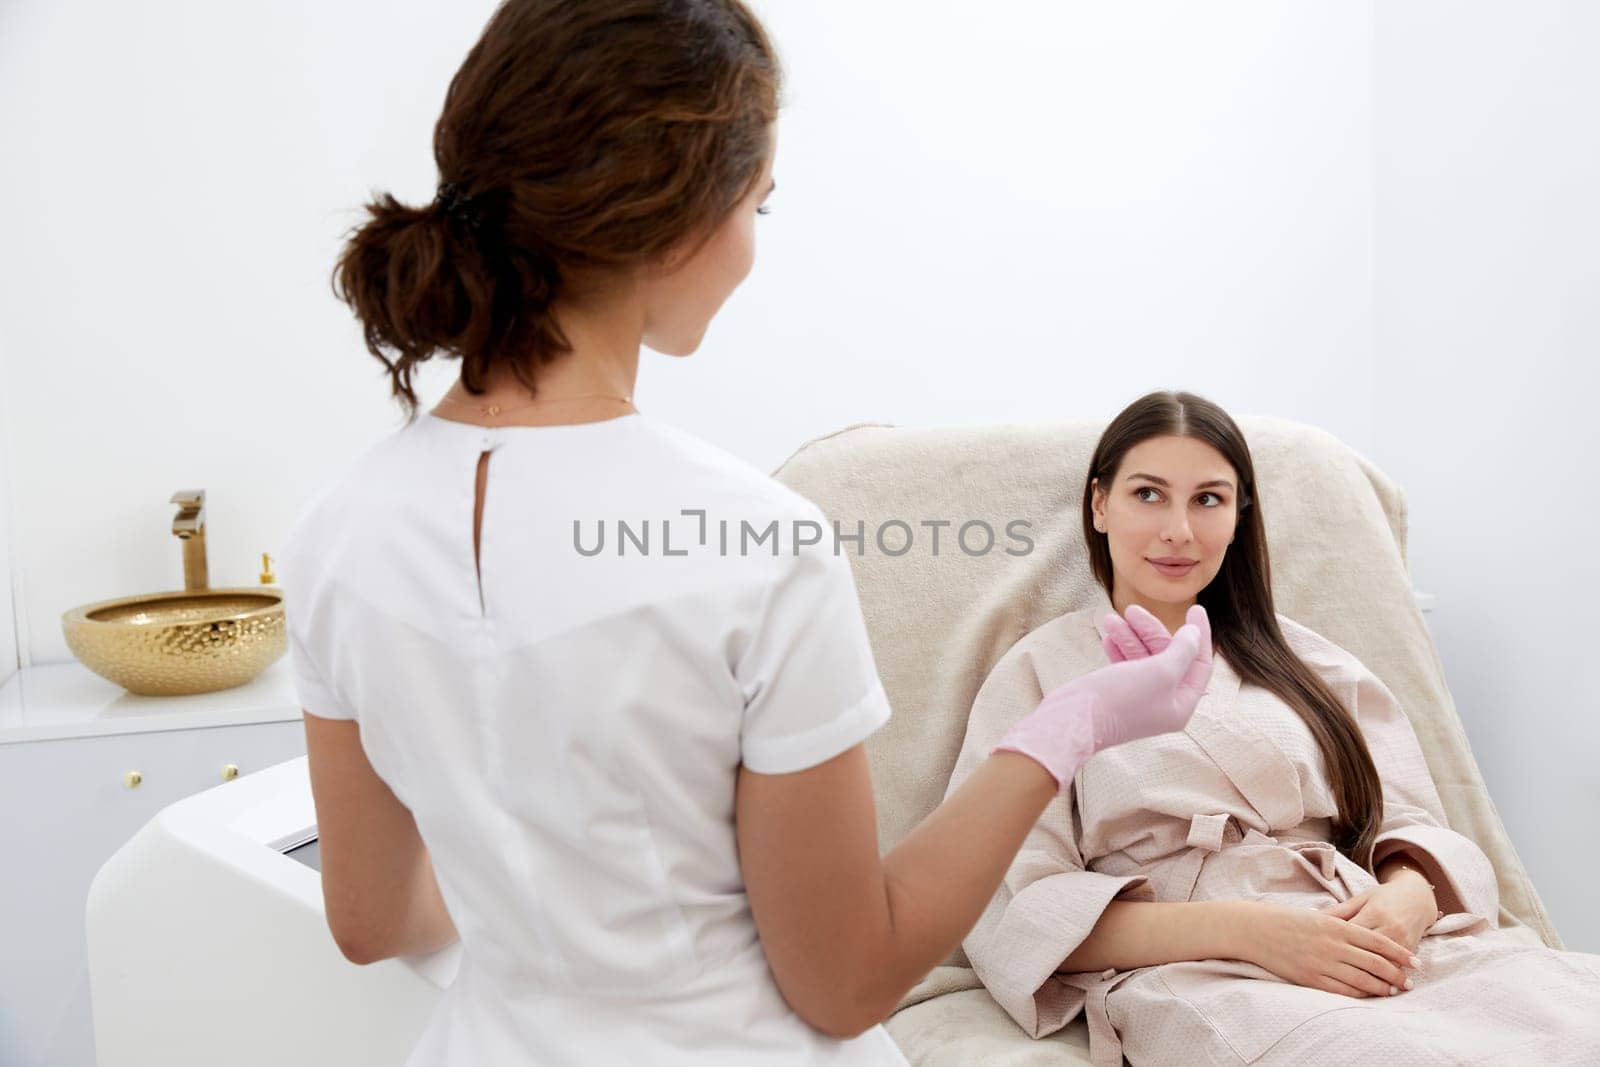 Within the clinic, a patient and young female cosmetologist have a deep discussion about available beauty procedures